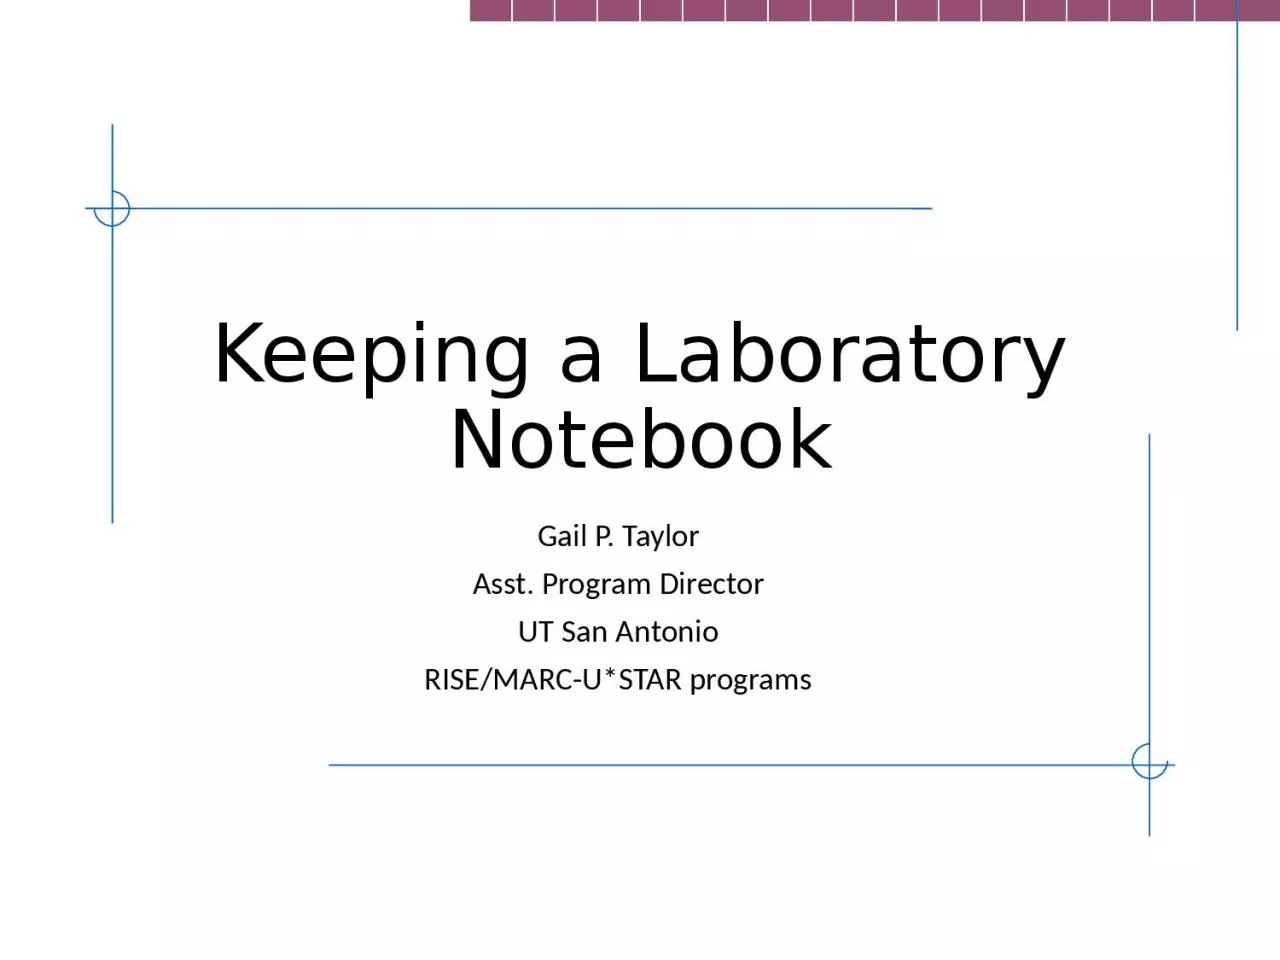 Keeping a Laboratory Notebook